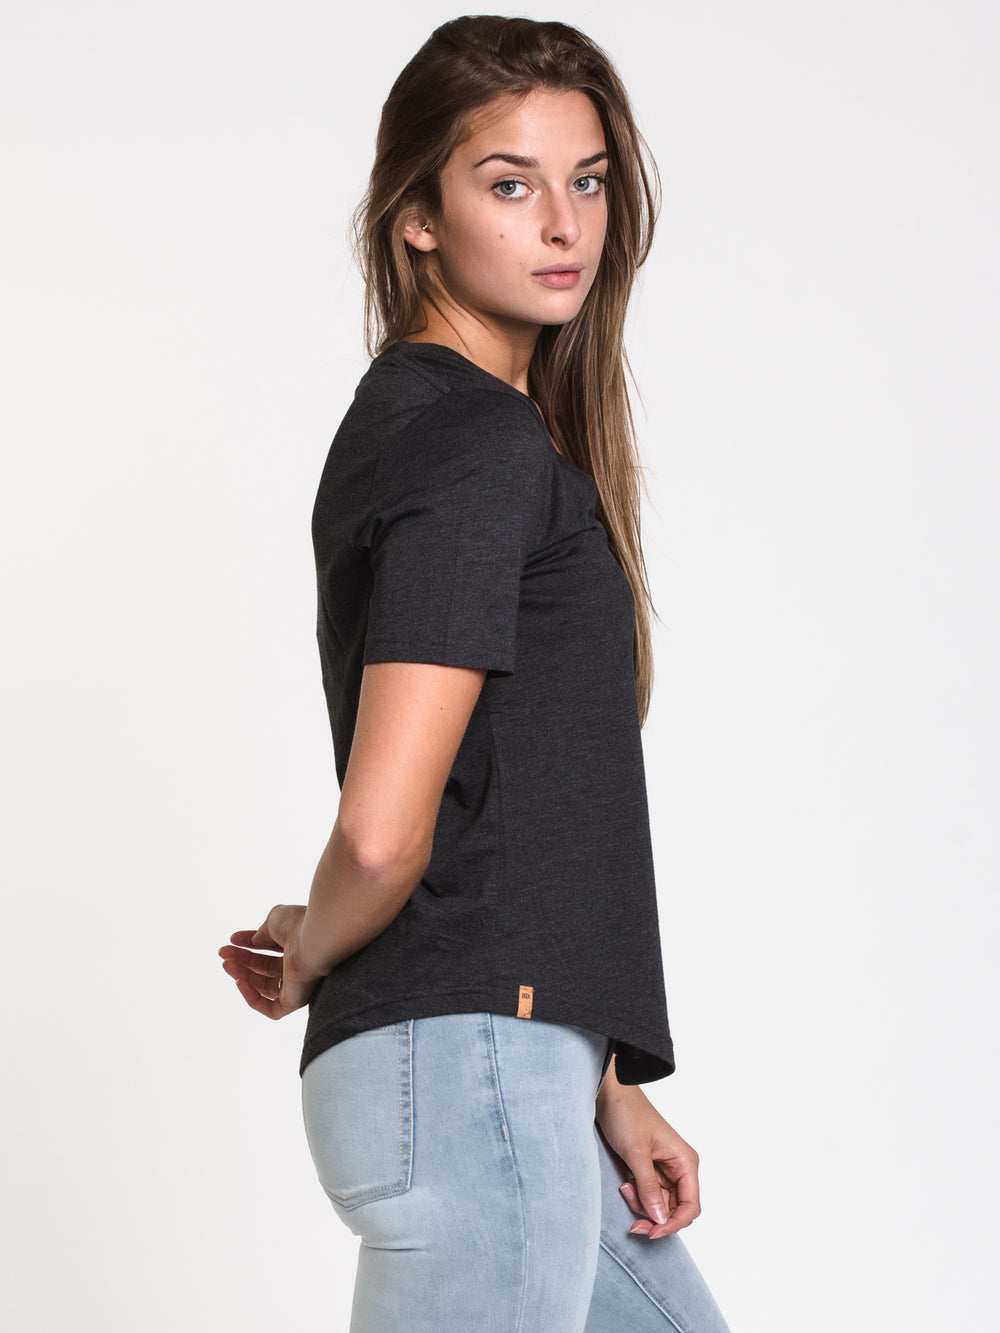 TENTREE V-NECK CORK PATCH T-SHIRT  - CLEARANCE